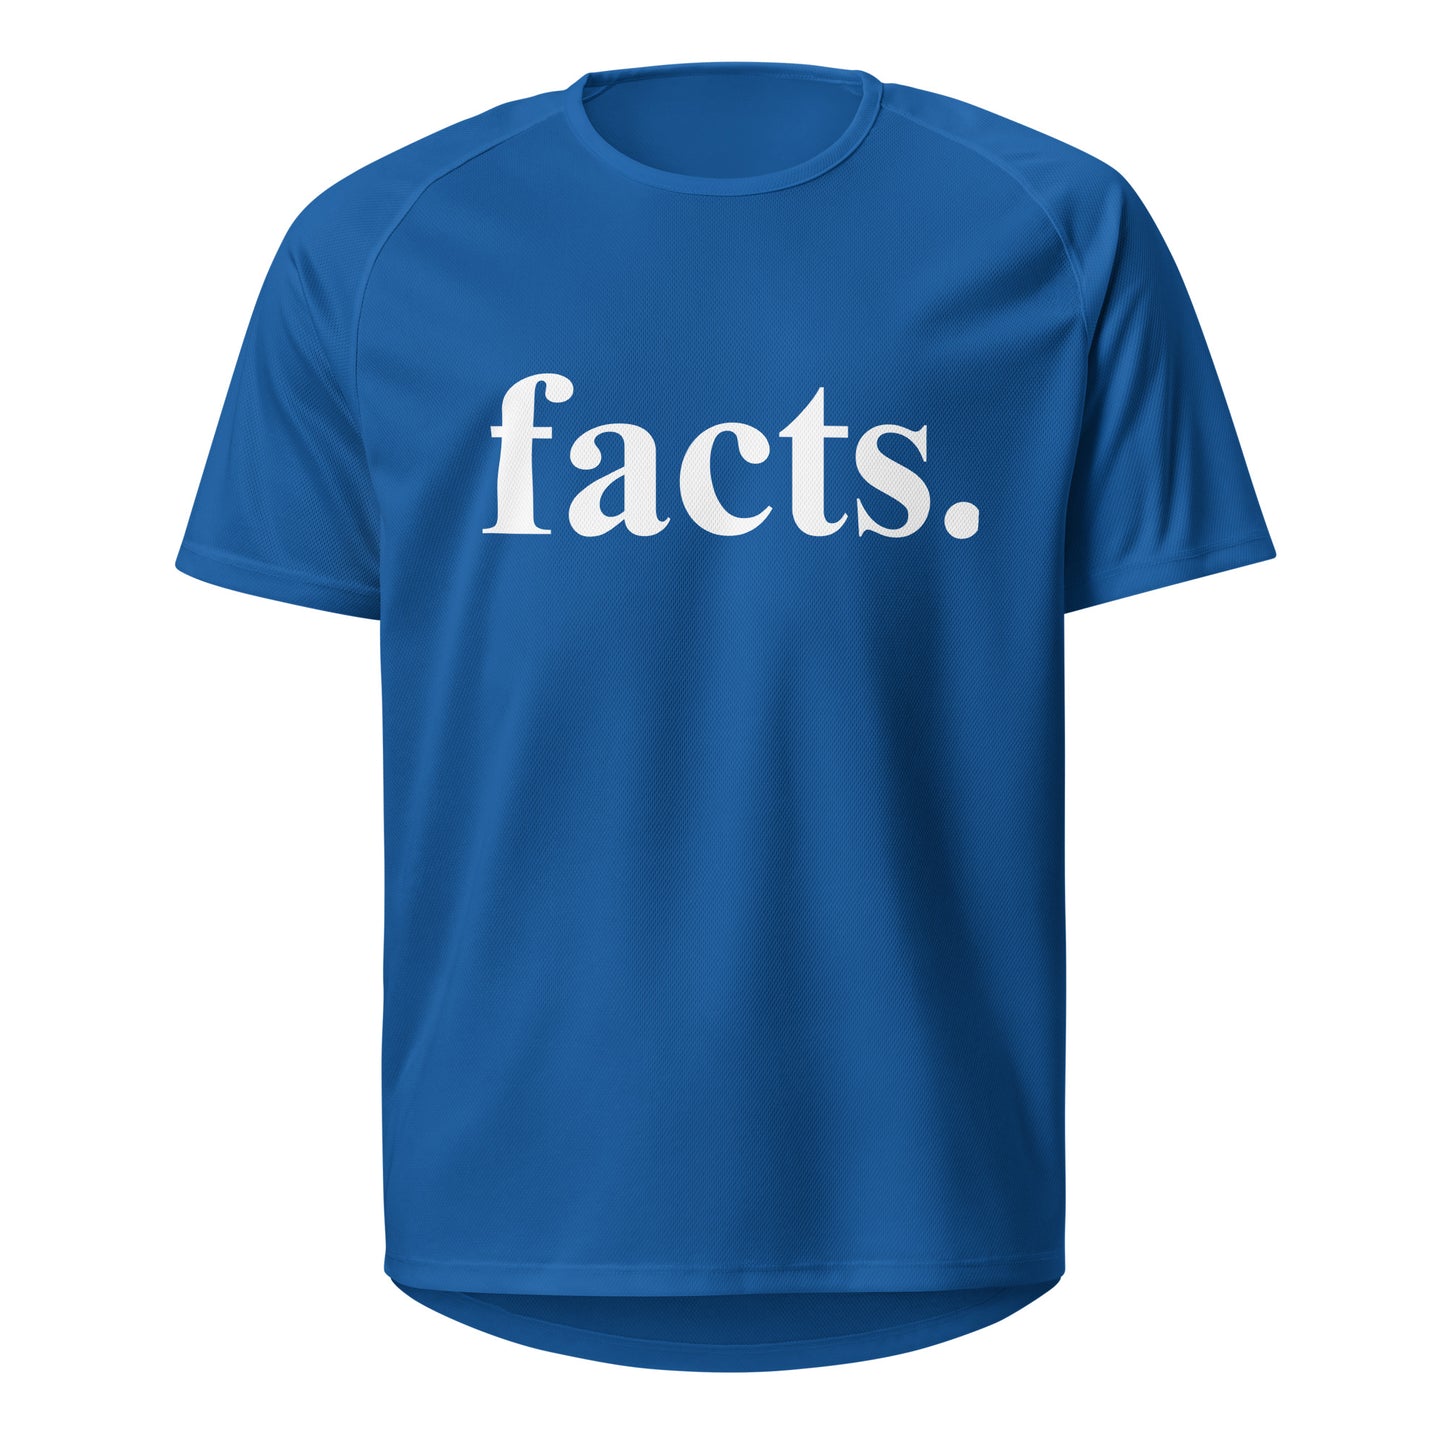 "facts." Unisex sports jersey